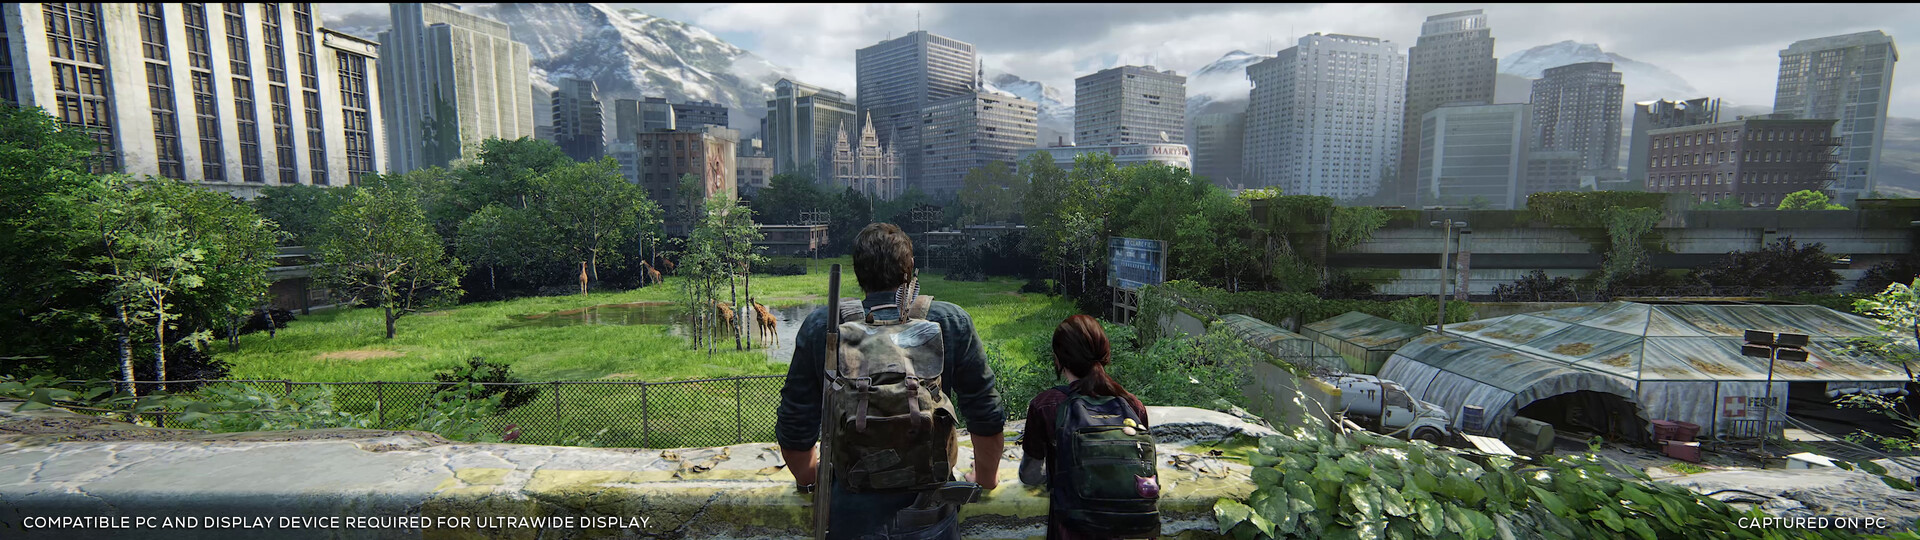 The Last of Us PC: Release date and how to pre-order the game on Steam